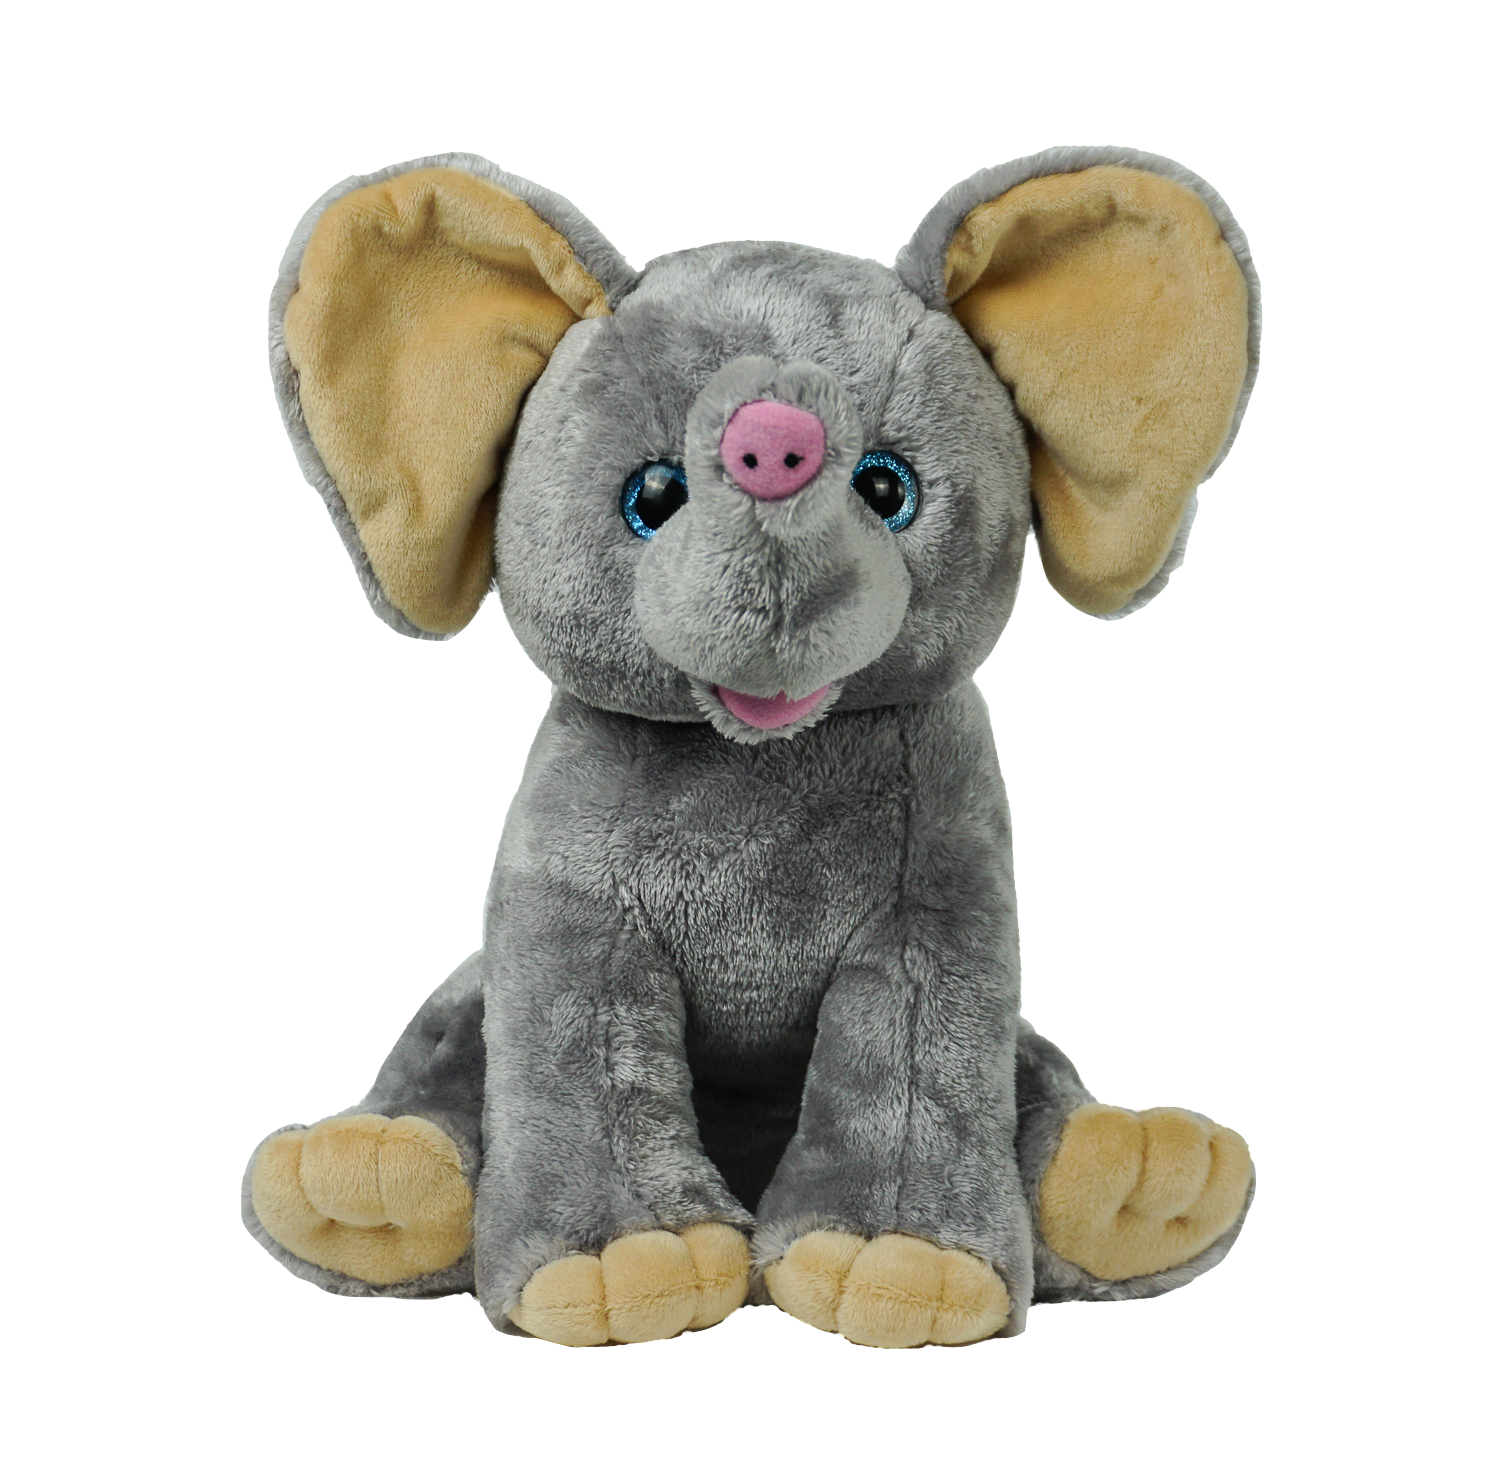 Ellie the Elephant unstuffed 16 inch plush animal in the Frannie and Friends interactive create a cuddly club